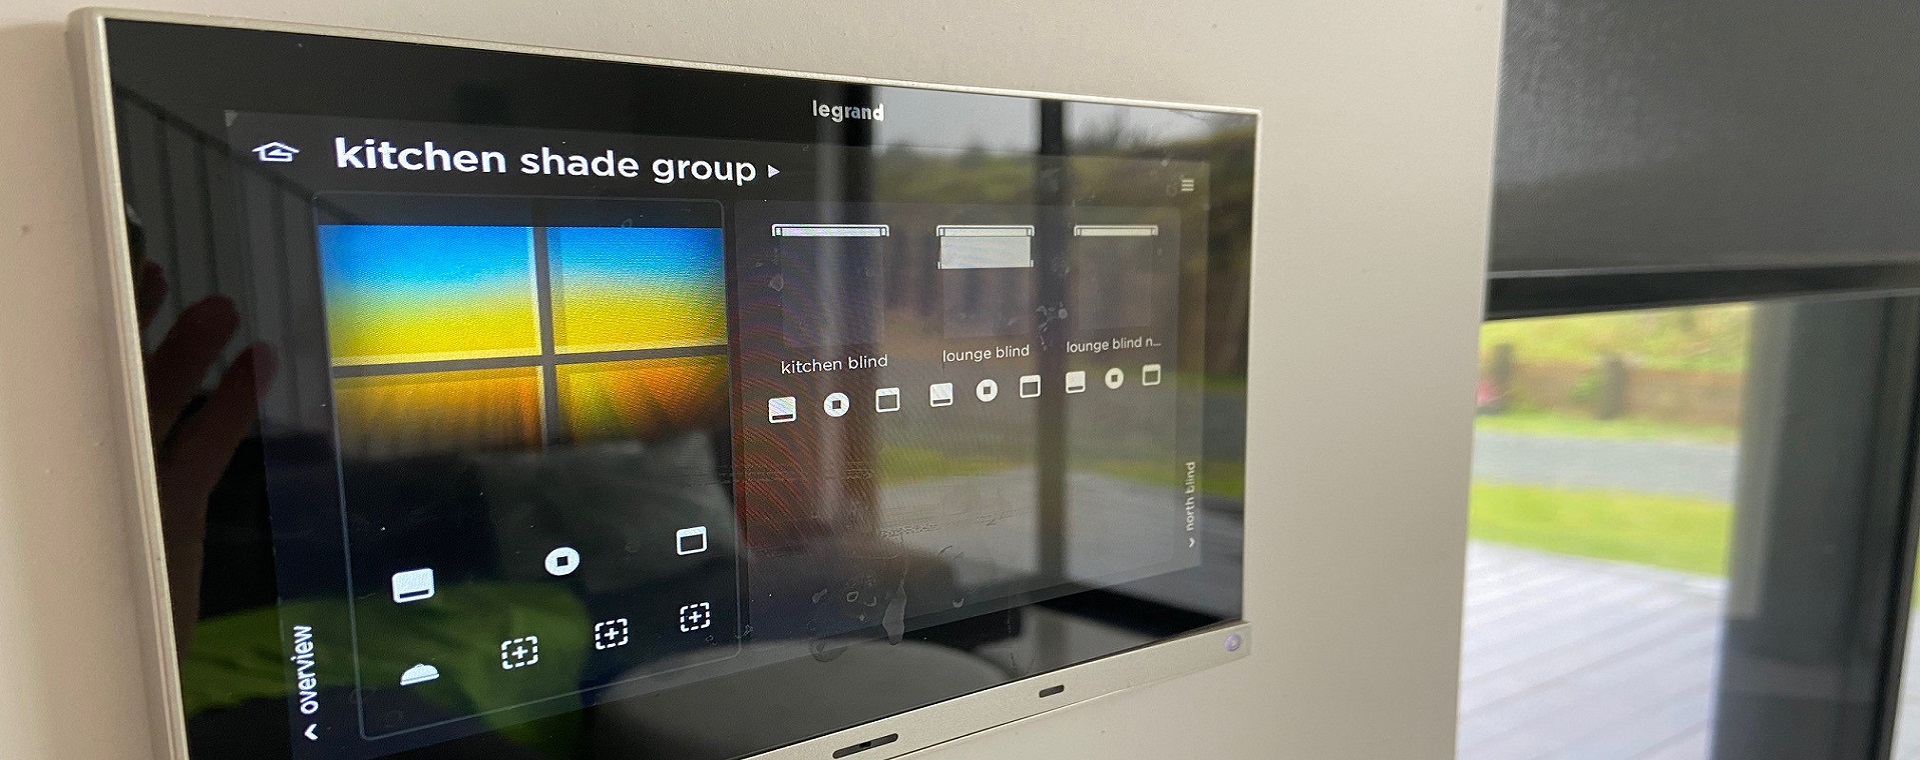 Vantage Equinox home automation LED touchscreen showing motorised blind control.